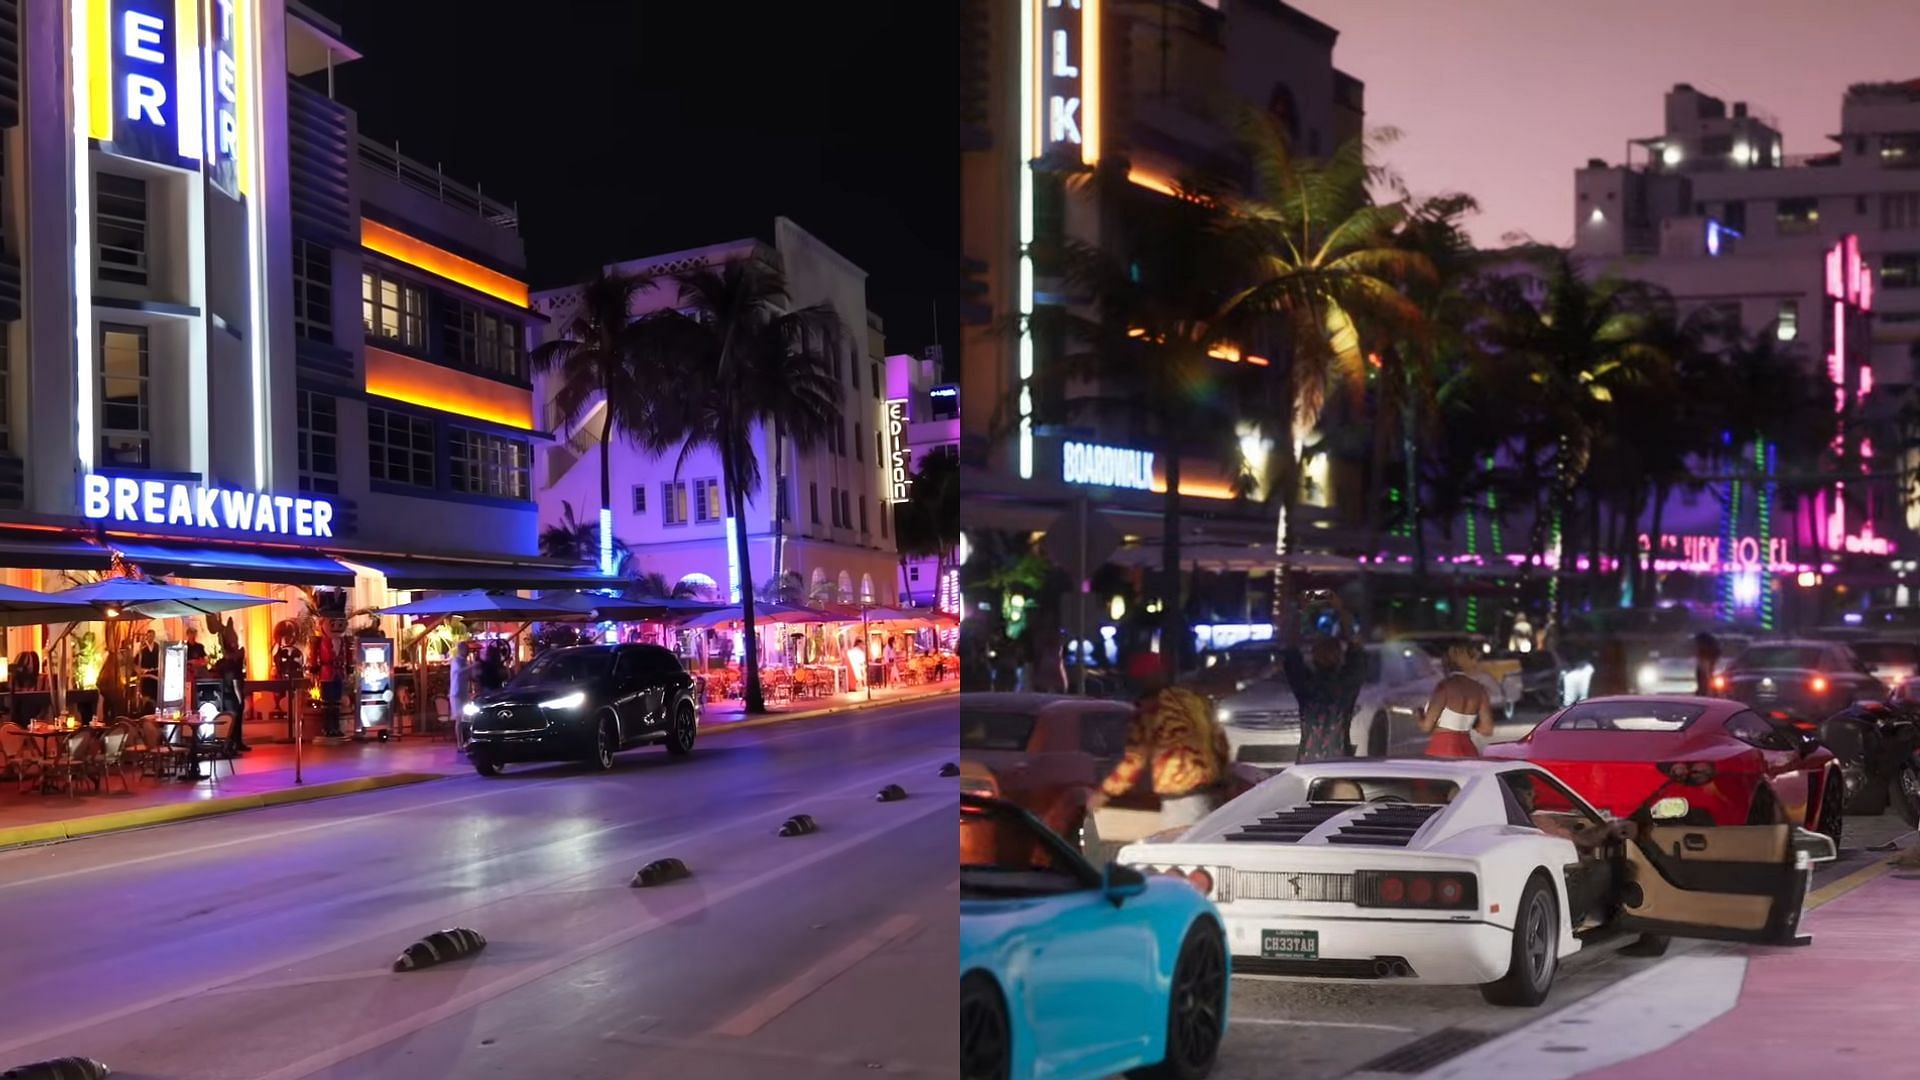 The Ocean Drive, as seen in the trailer. (Images via YouTube/@JoelFrancoVlogs, Rockstar Games)